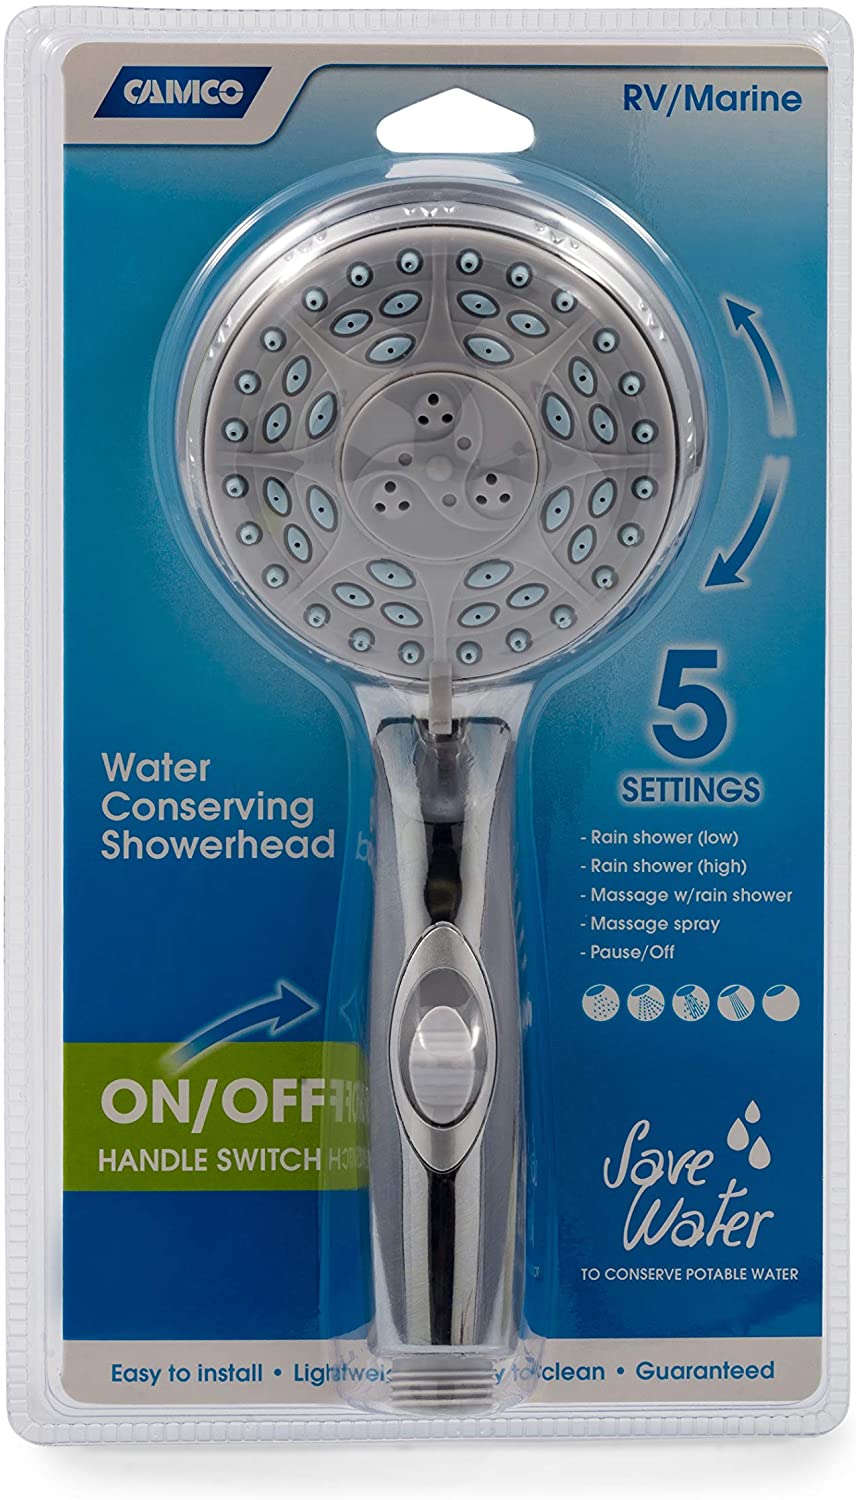 Camco 43710 RV Marine Showerhead With On/Off Switch - Chrome